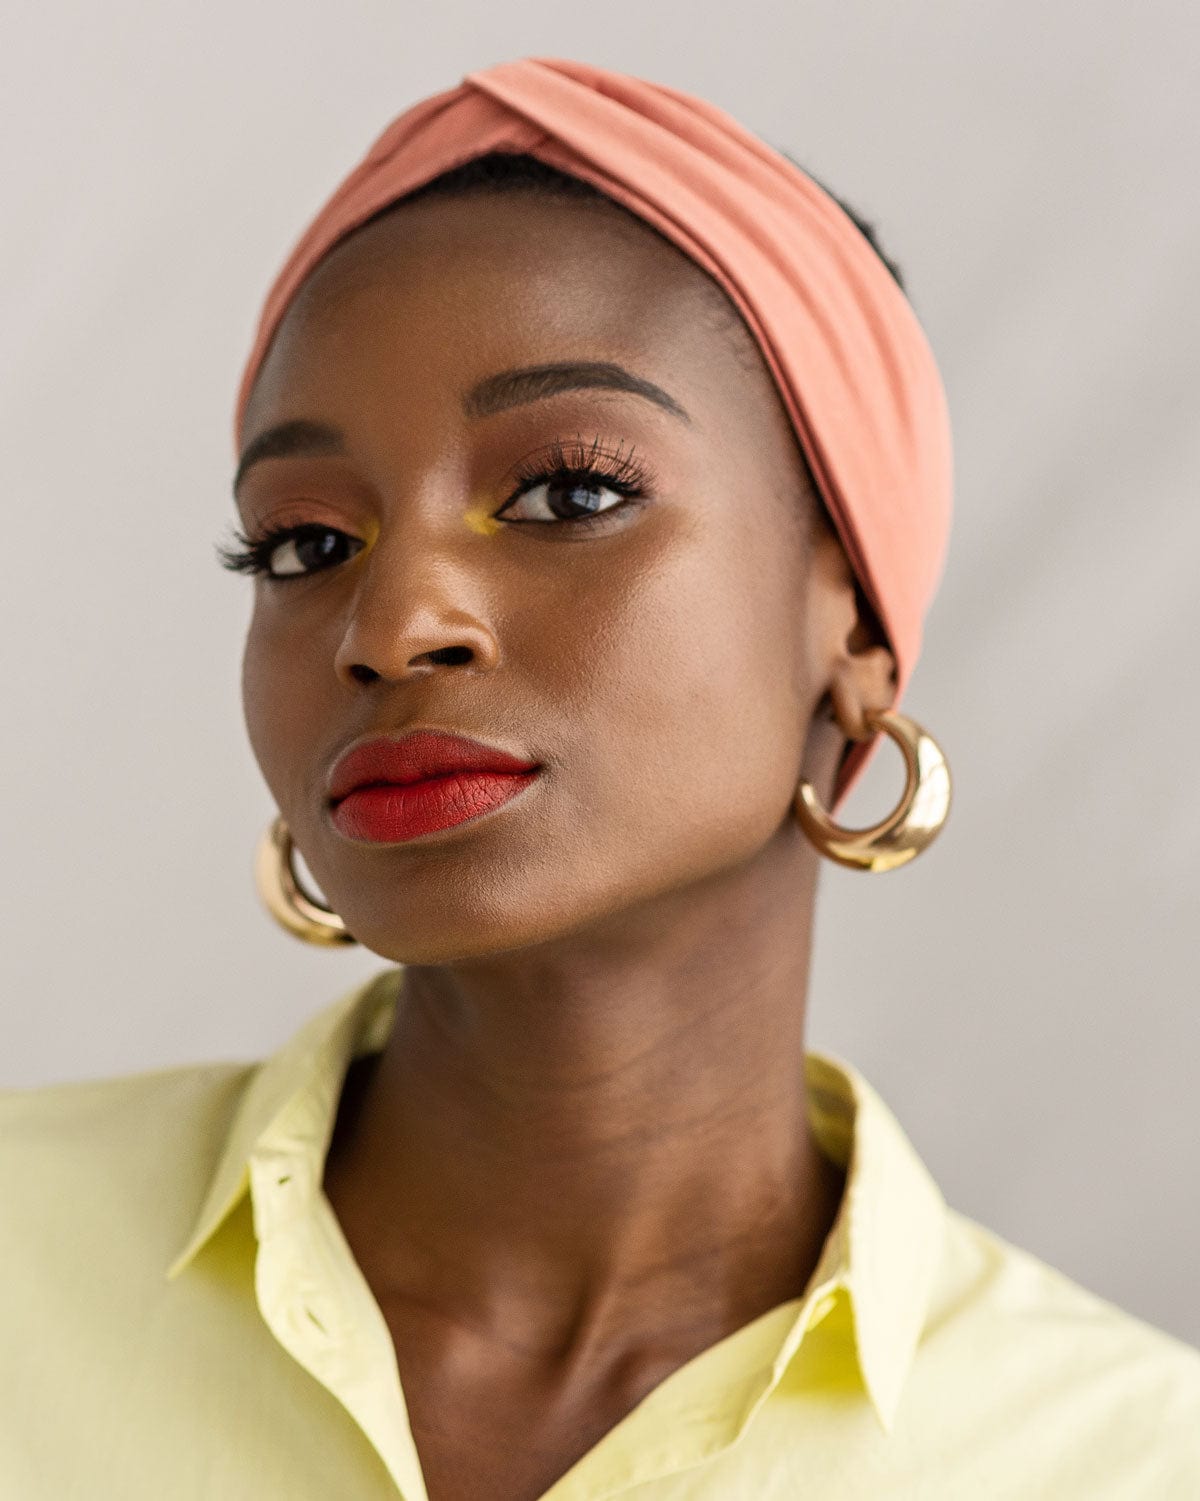 Last Chance Renew Turbanette in Soft Coral Pink Turbanette